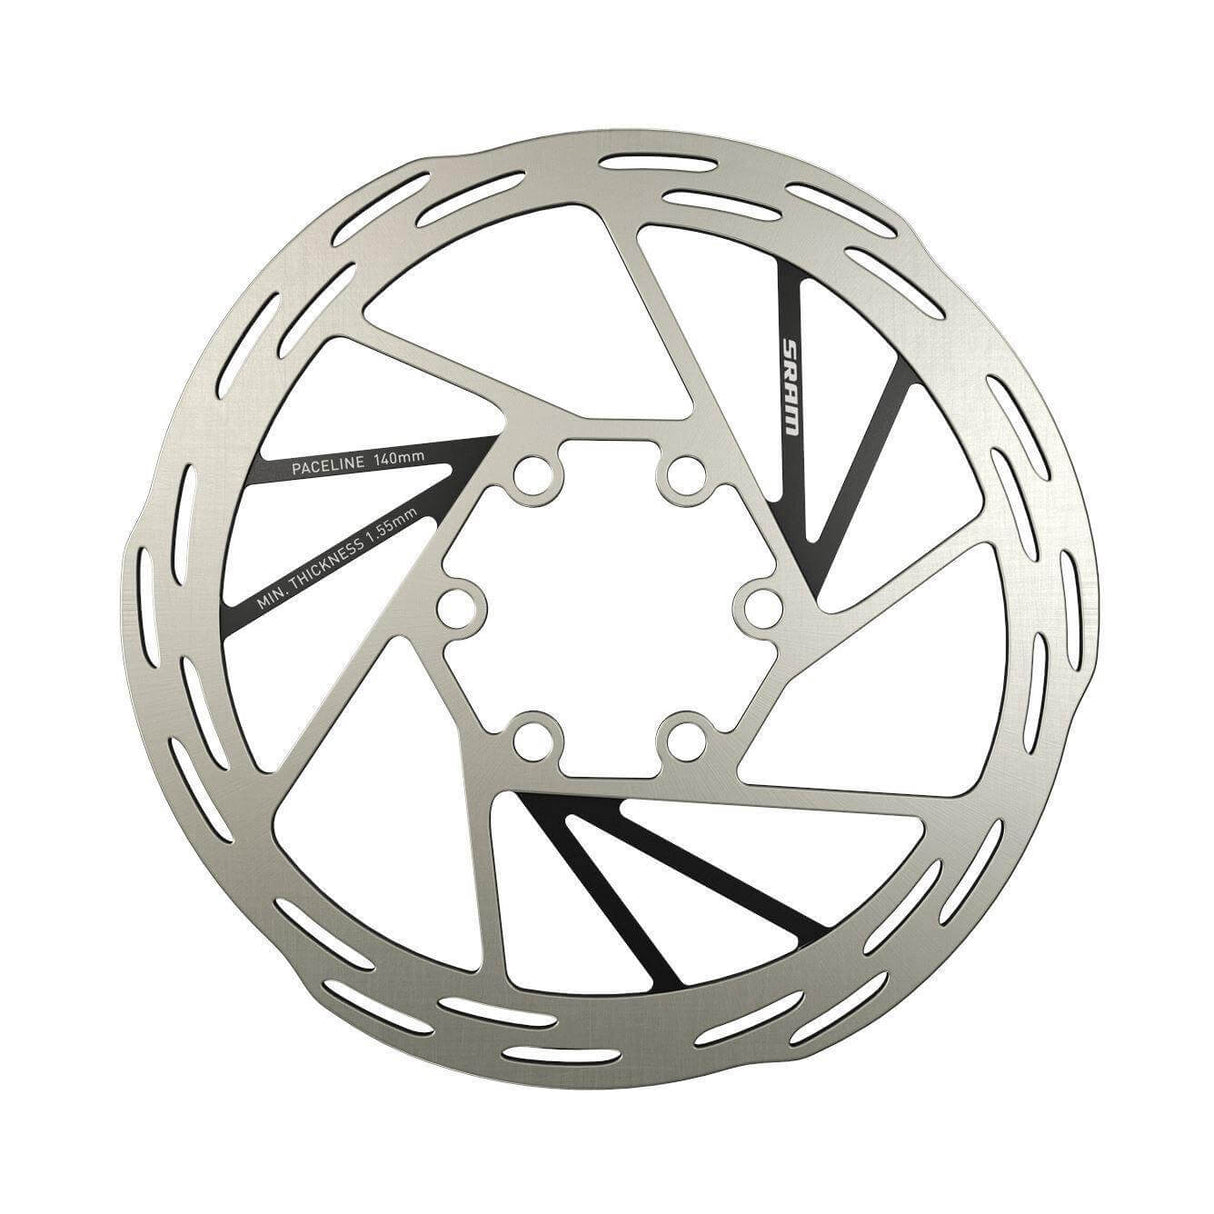 SRAM Paceline Disc Rotor | Strictly Bicycles